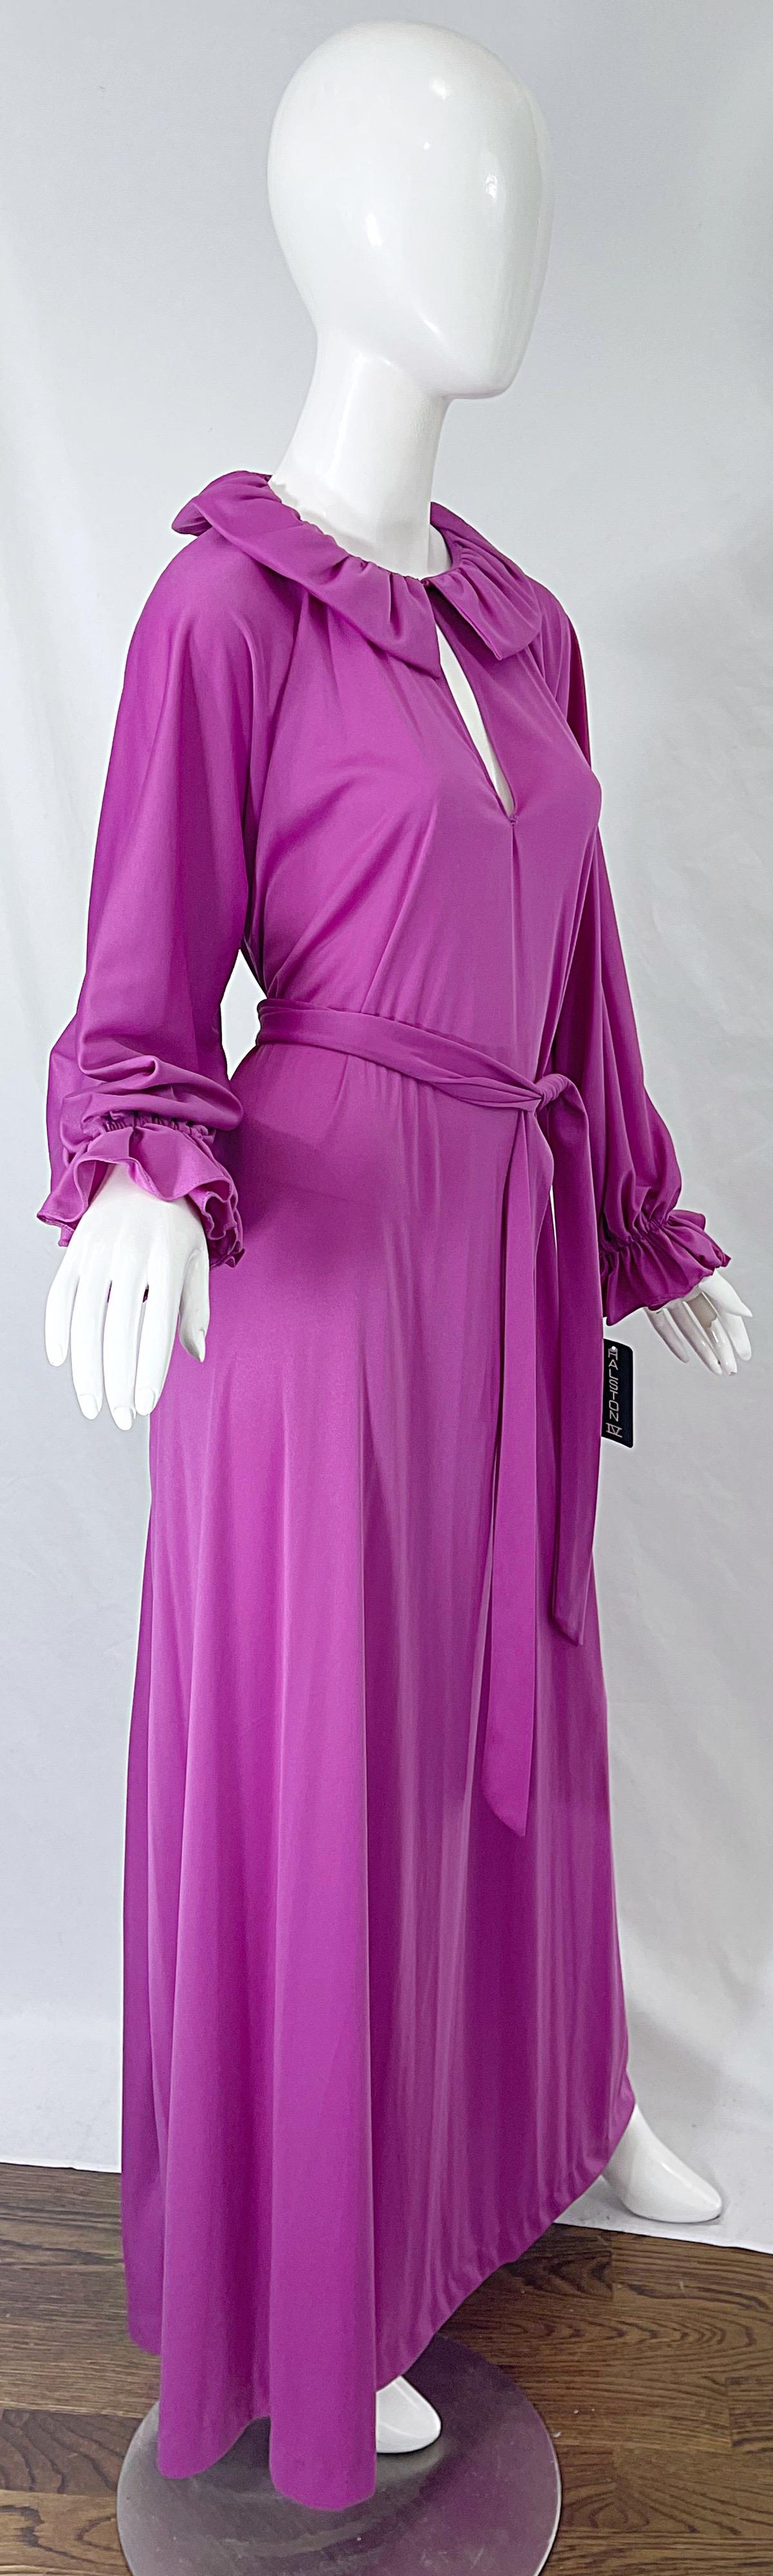 NWT 1970s Halston IV Purple / Pink One Size Fits All Vintage 70s Maxi Dress For Sale 3